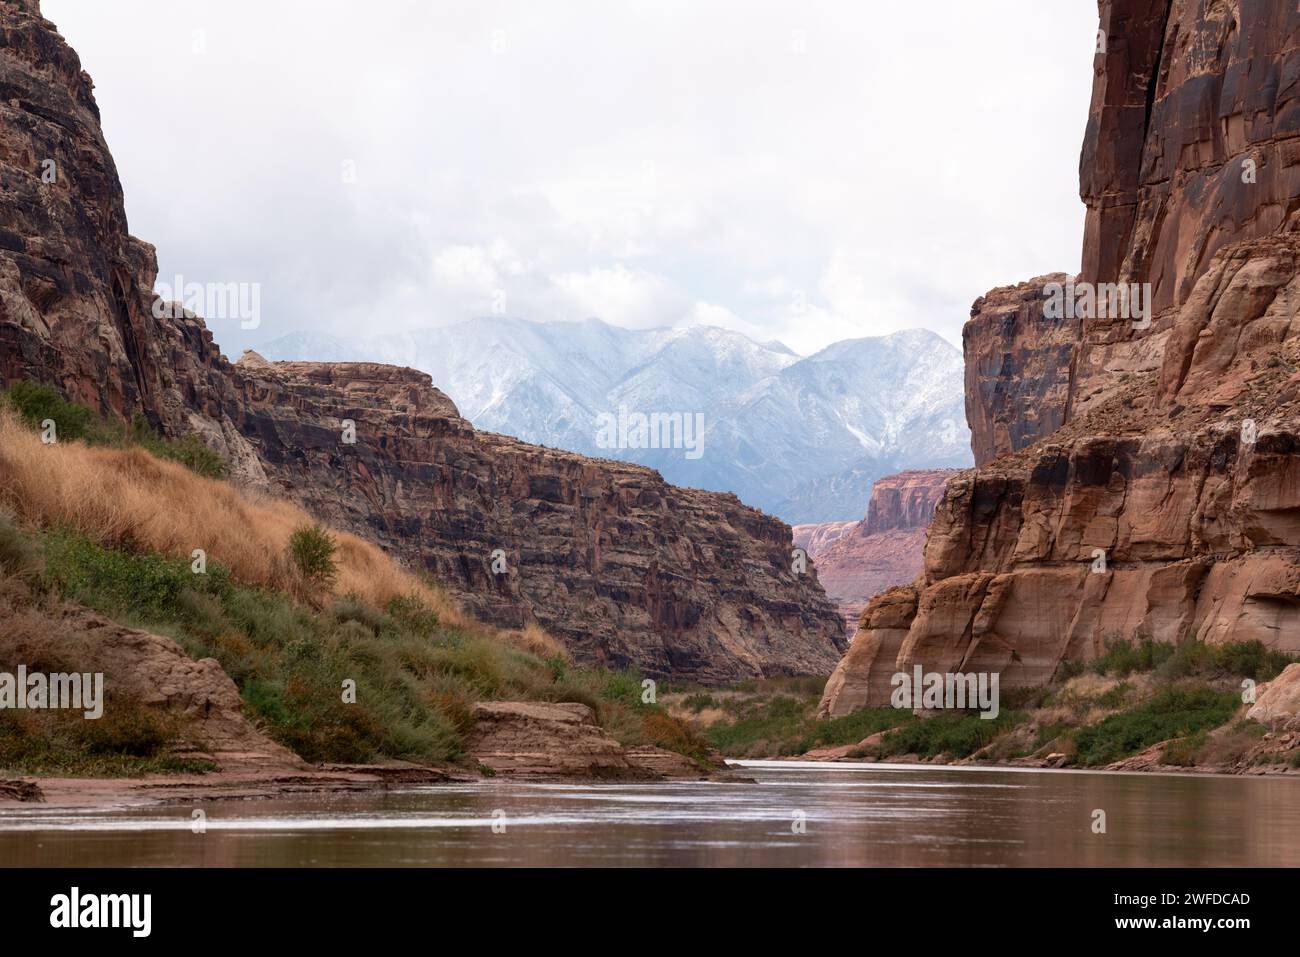 Colorado River in Cataract Canyon with the Henry Mountains in the background, Utah. Stock Photo